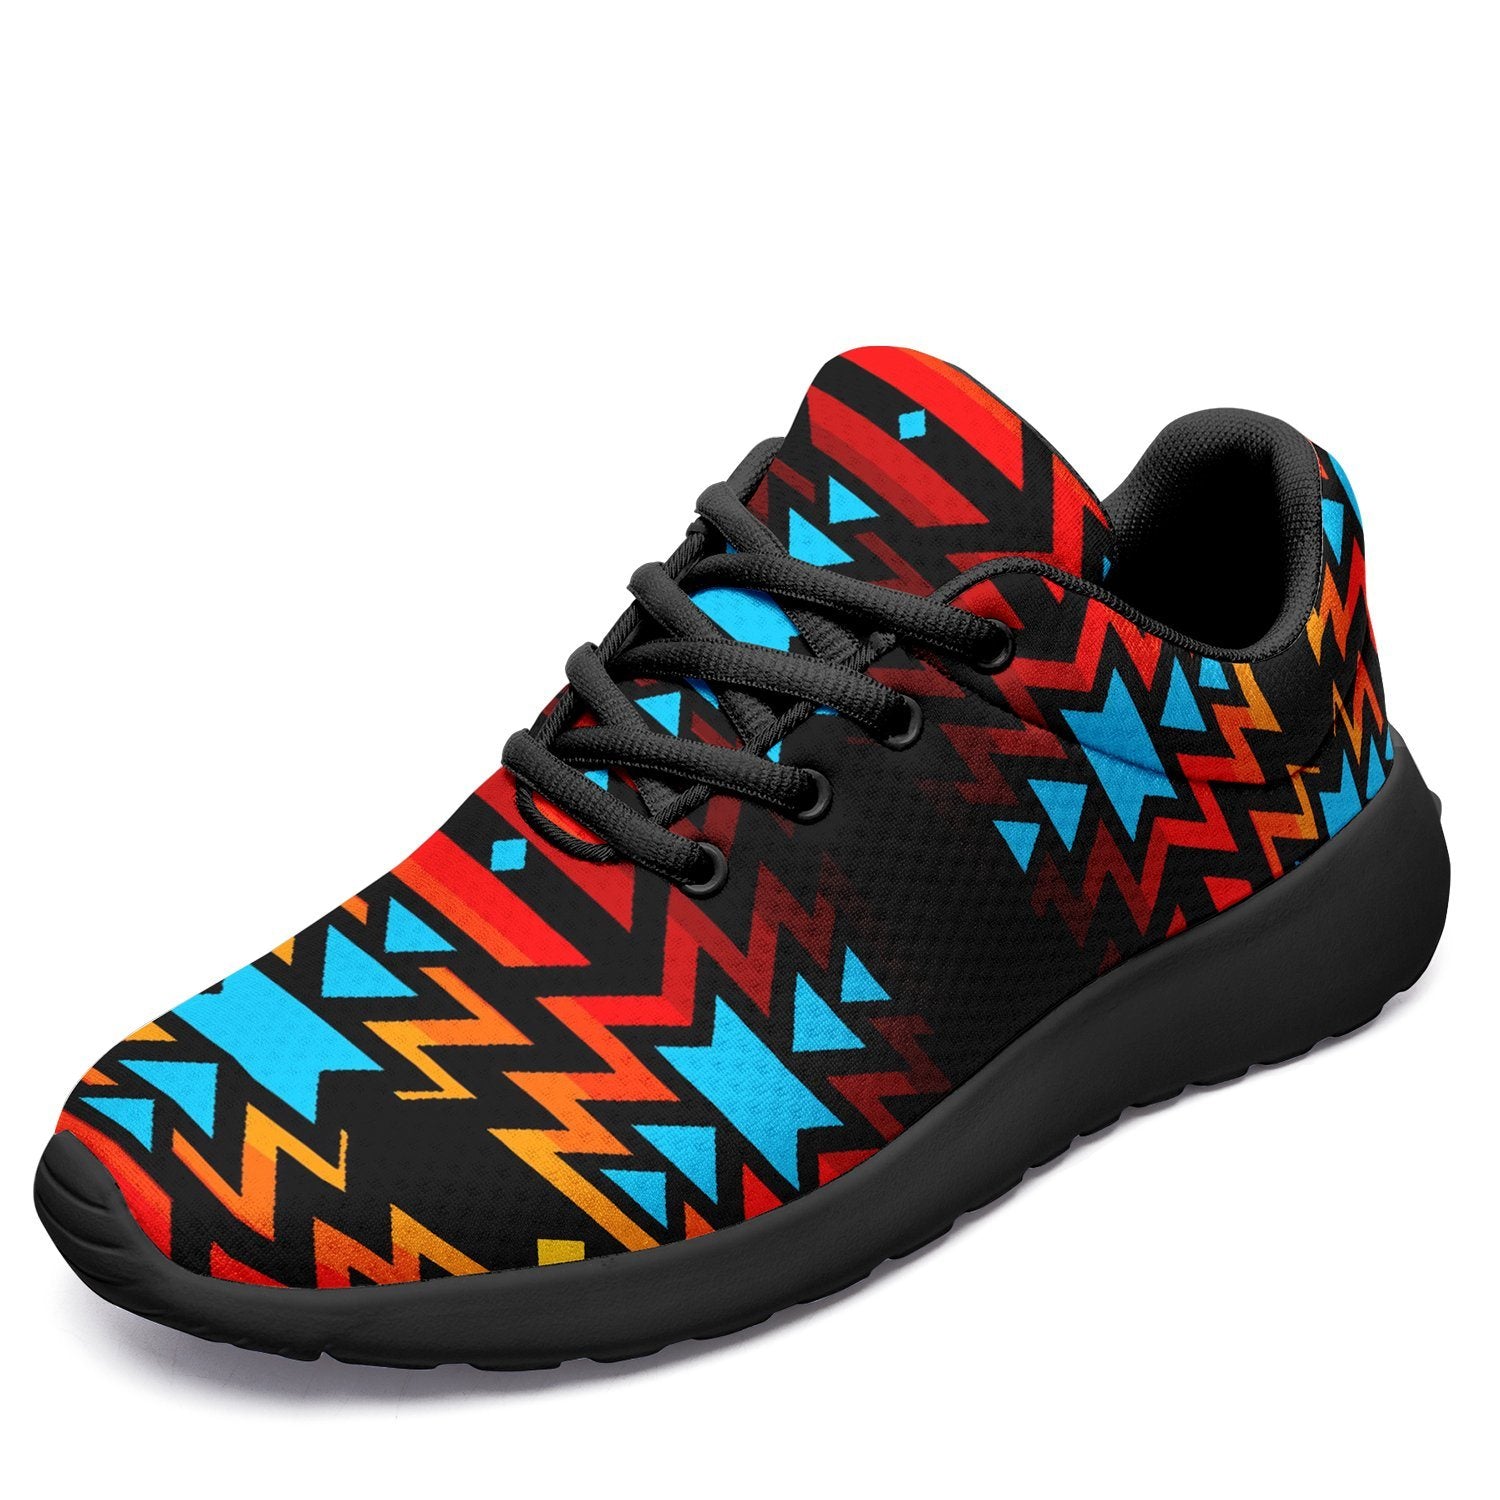 Black Fire and Turquoise Ikkaayi Sport Sneakers 49 Dzine US Women 4.5 / US Youth 3.5 / EUR 35 Black Sole 